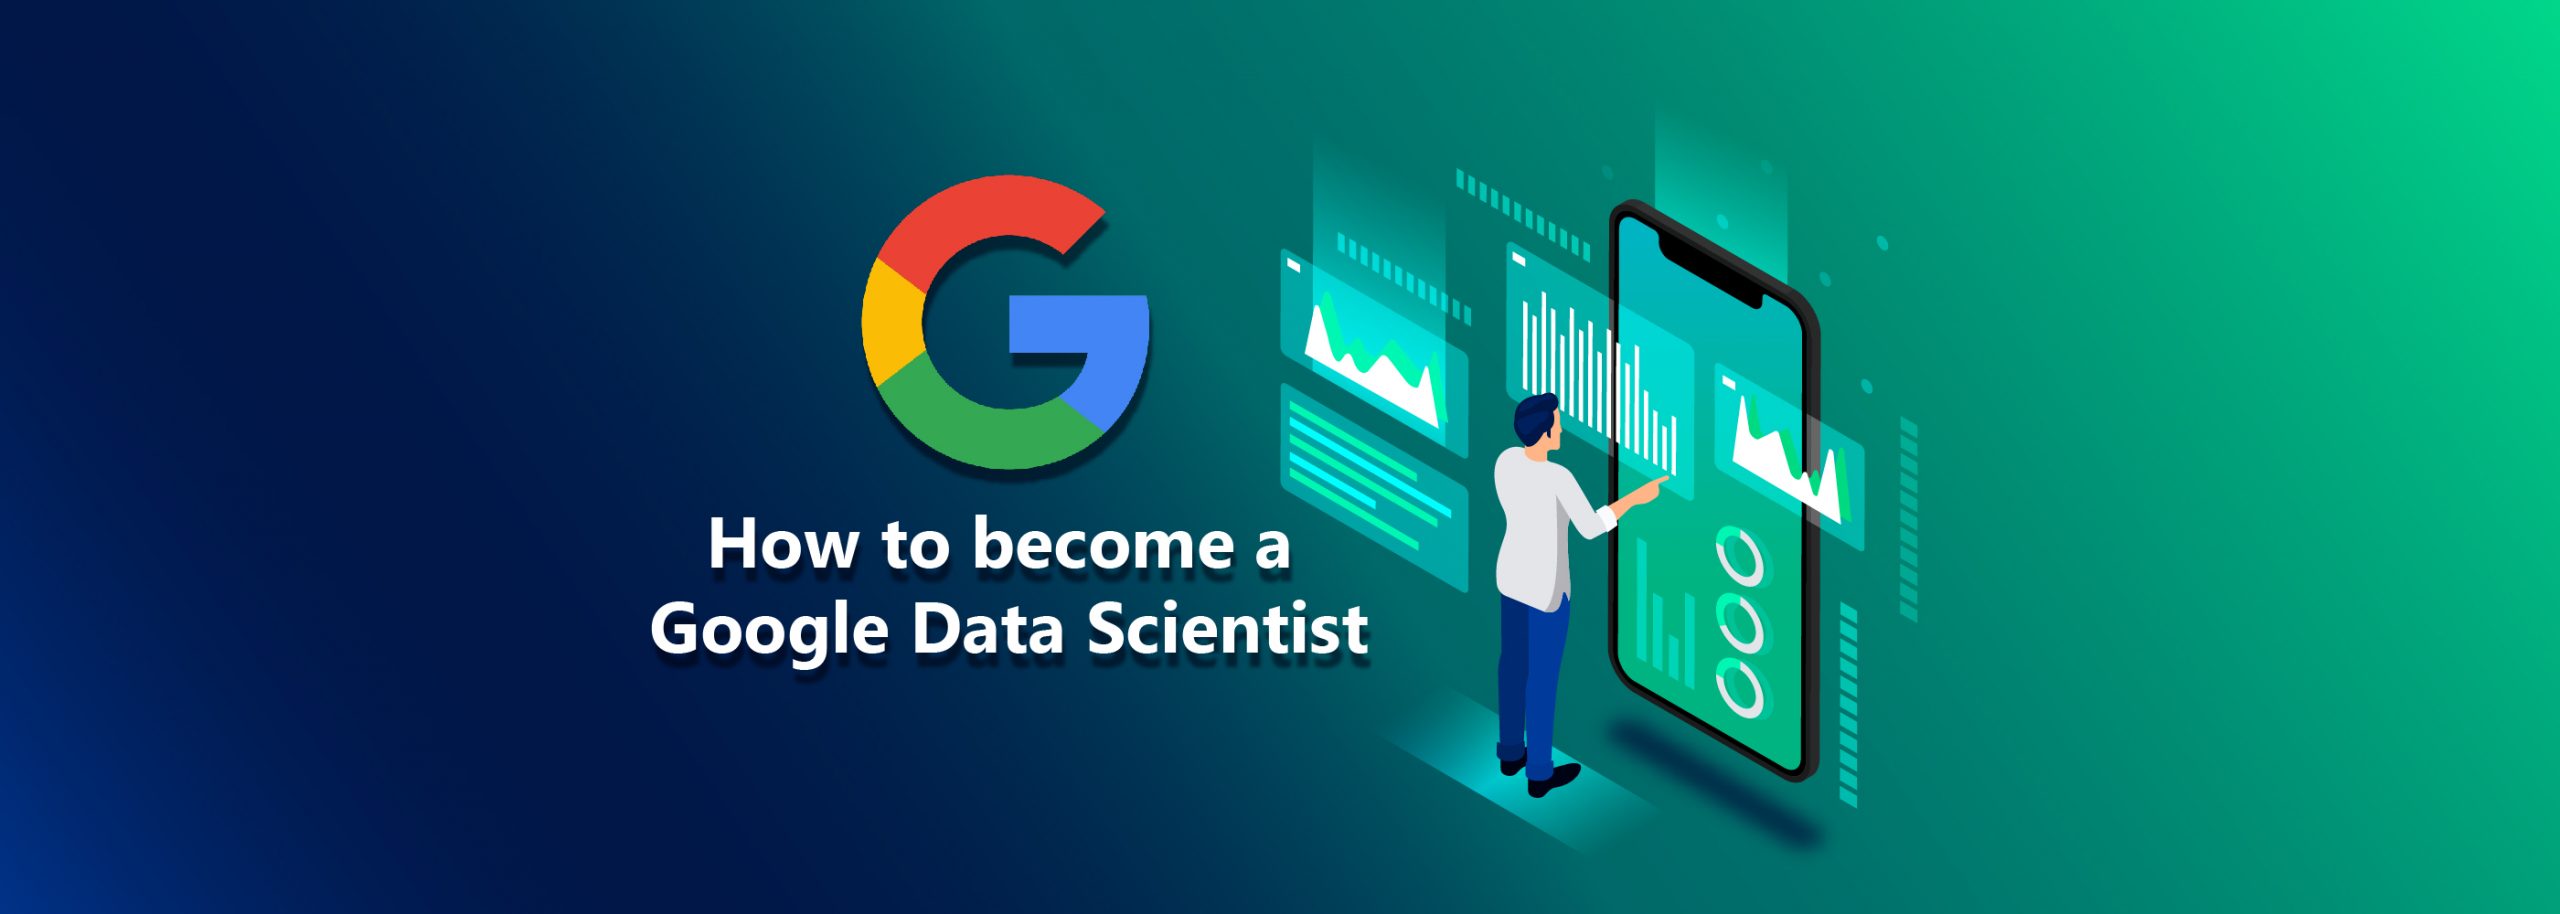 How To Become a Google Data Scientist: 3 Important Stages | DataTrained